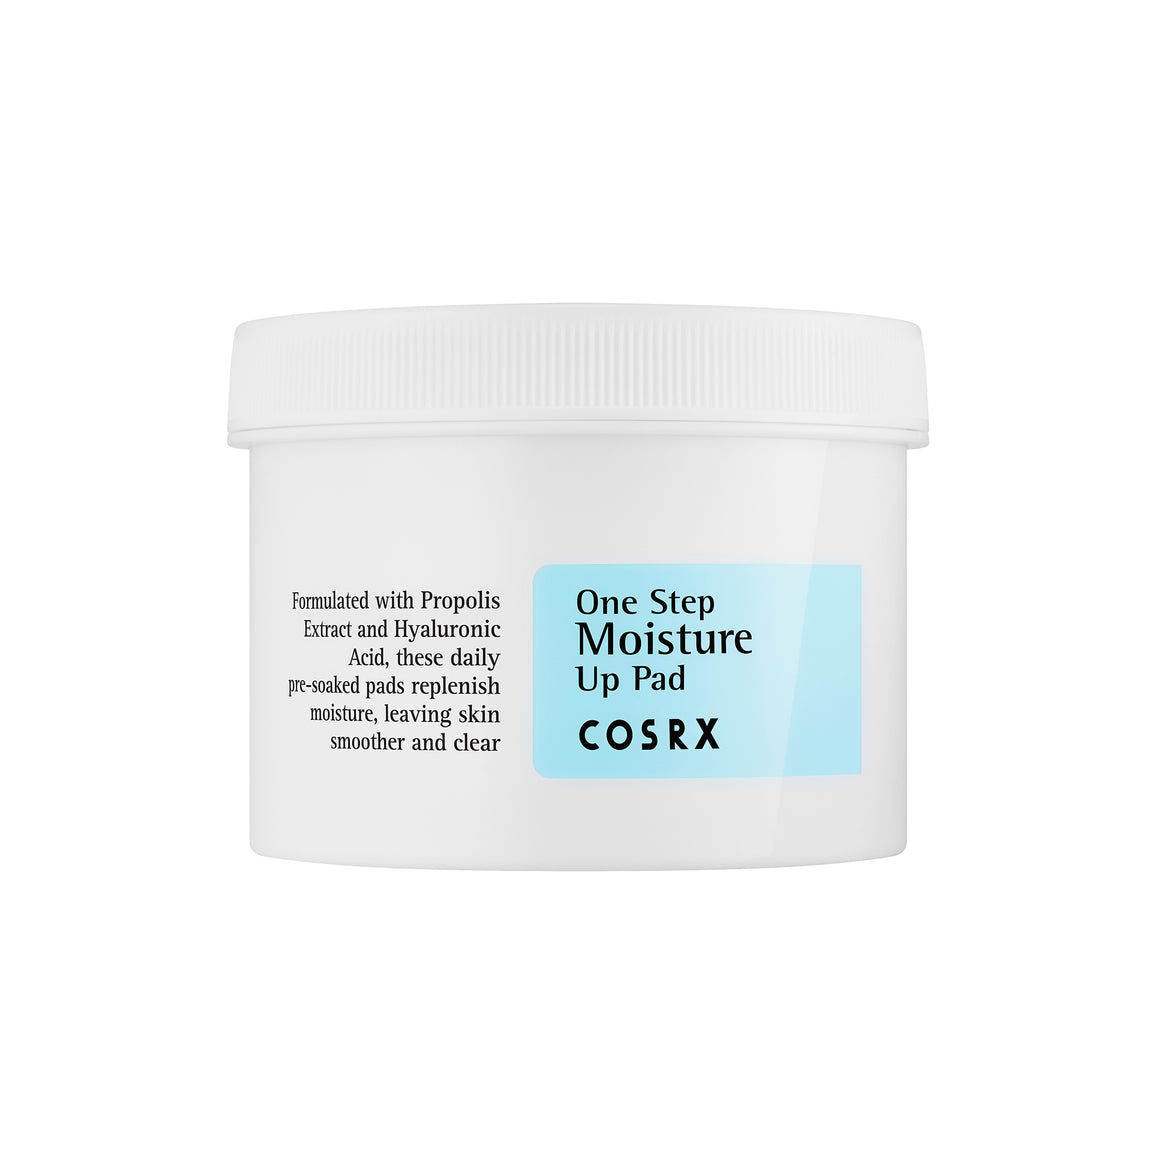 COSRX One Step Moisture Up Pad [EXP 05.20.2021]